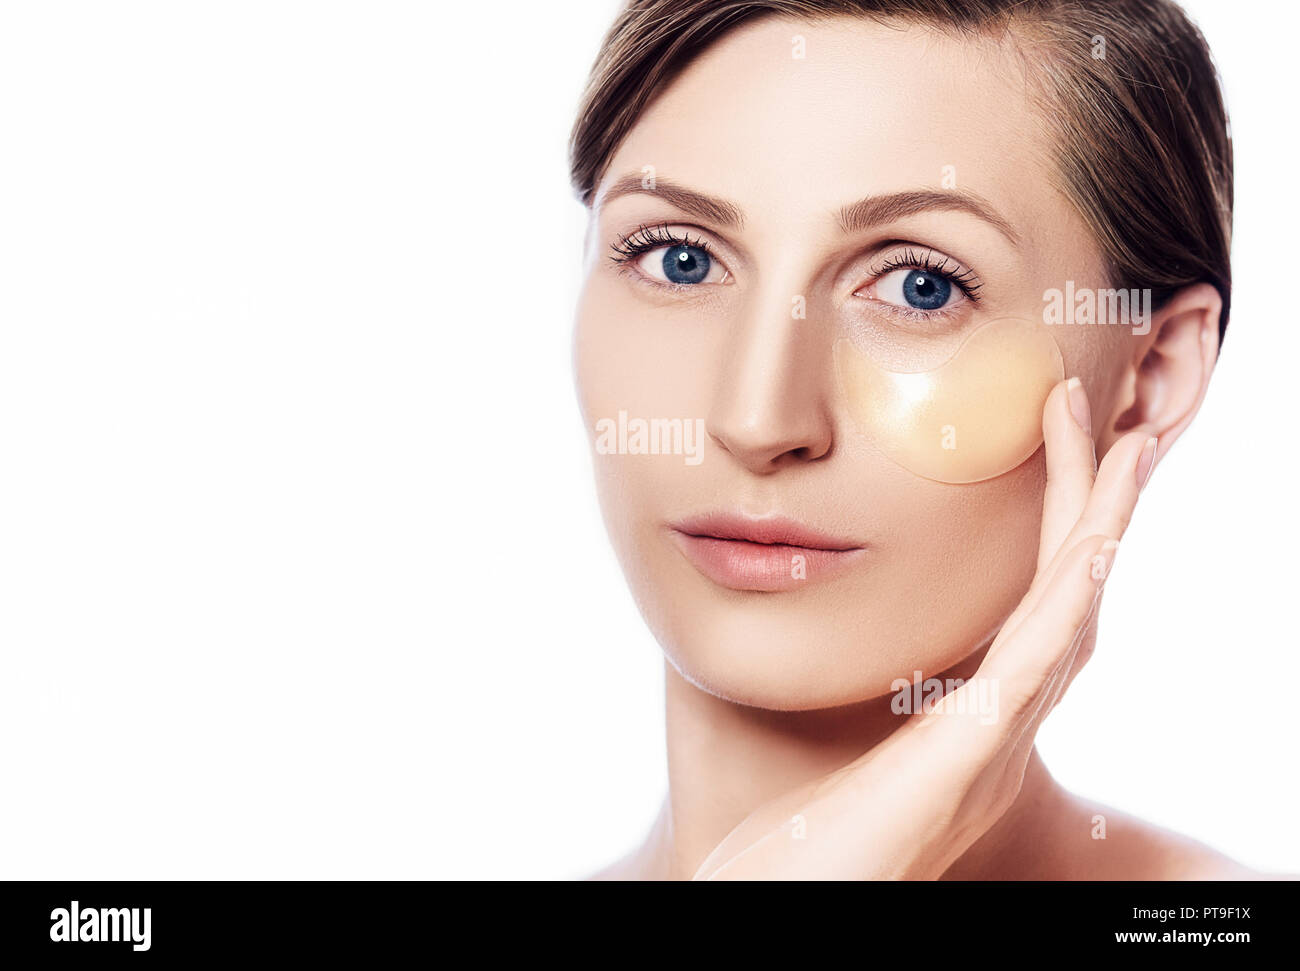 eye patches removing swelling under the eyes Stock Photo